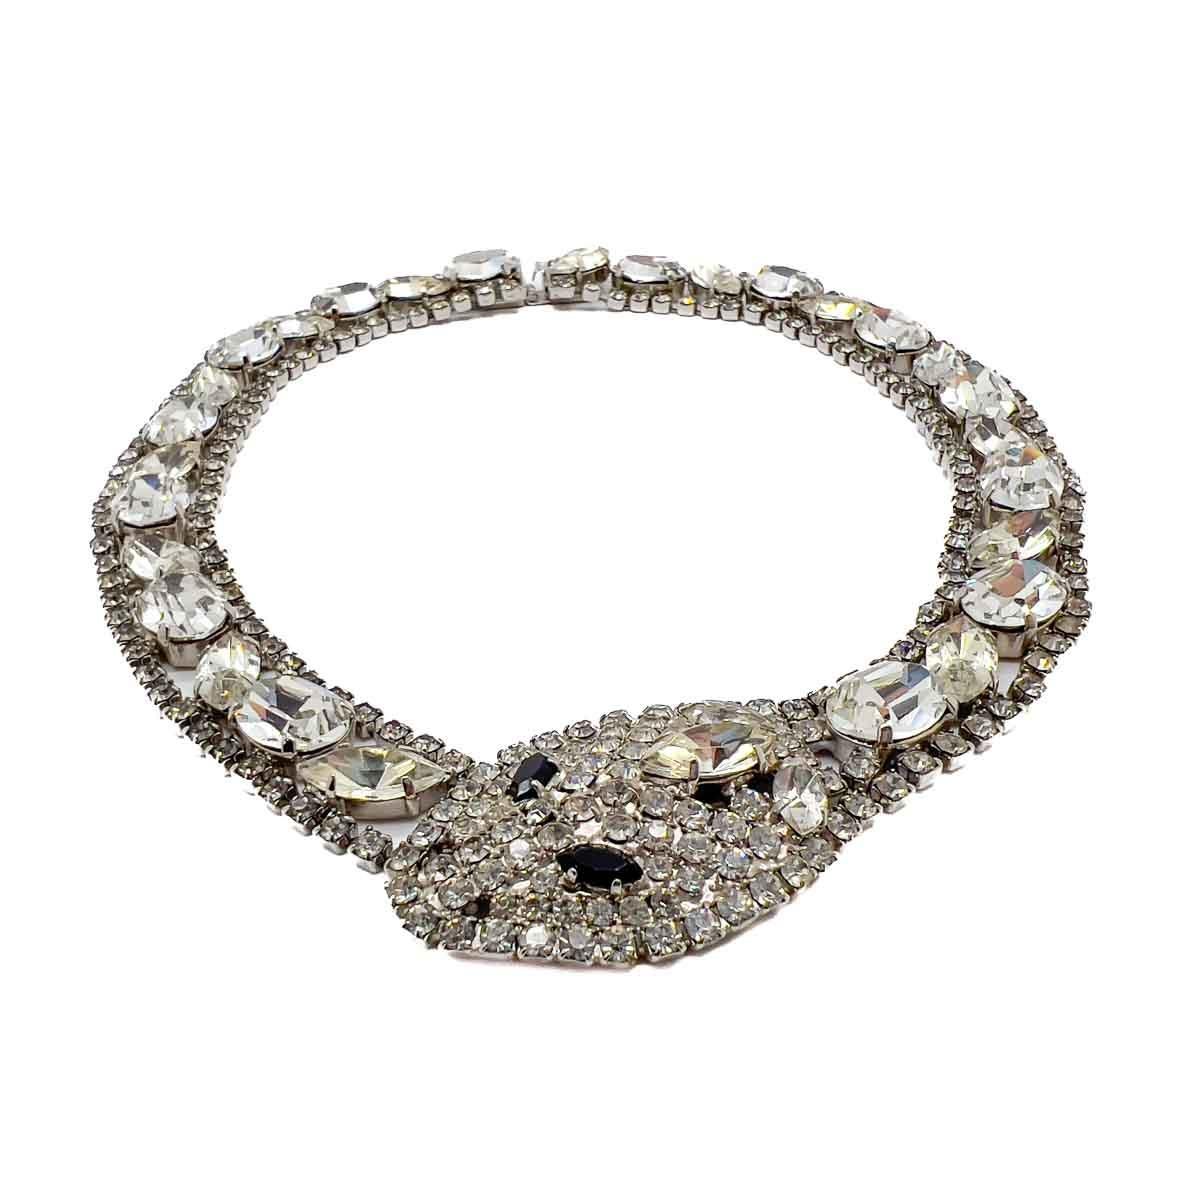 A Vintage Butler & Wilson Snake Collar from the 1980s. A dramatic riviere of fancy cut stones creates our wonderful serpent collar that winds fully around the neck to wonderful effect. Claw set marquise and oval crystals edged with chatons creating